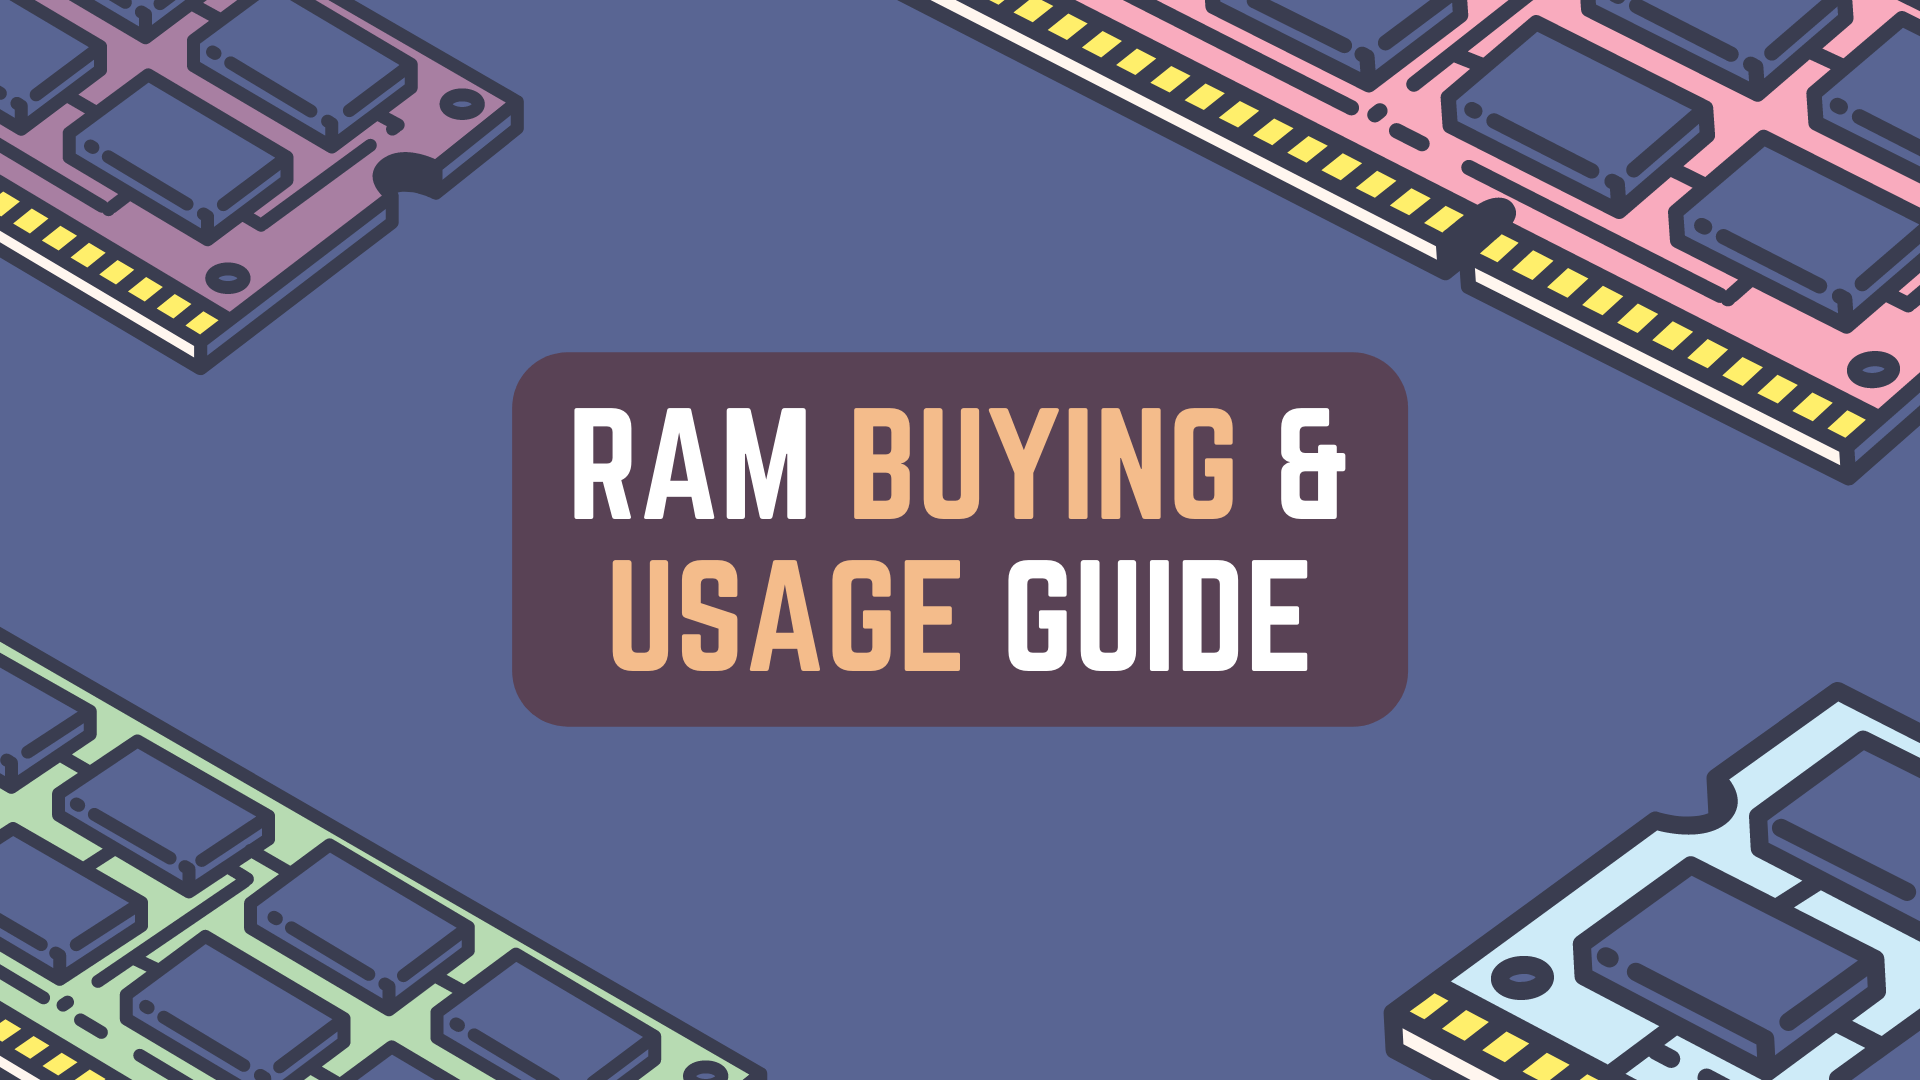 RAM Buying & Usage Guide | DDR4, DDR5 RAM Recommendations | DRAM, SDRAM, DDR RAM, | RAM Overclocking - OC | Product Guides - Bite Sized Tech